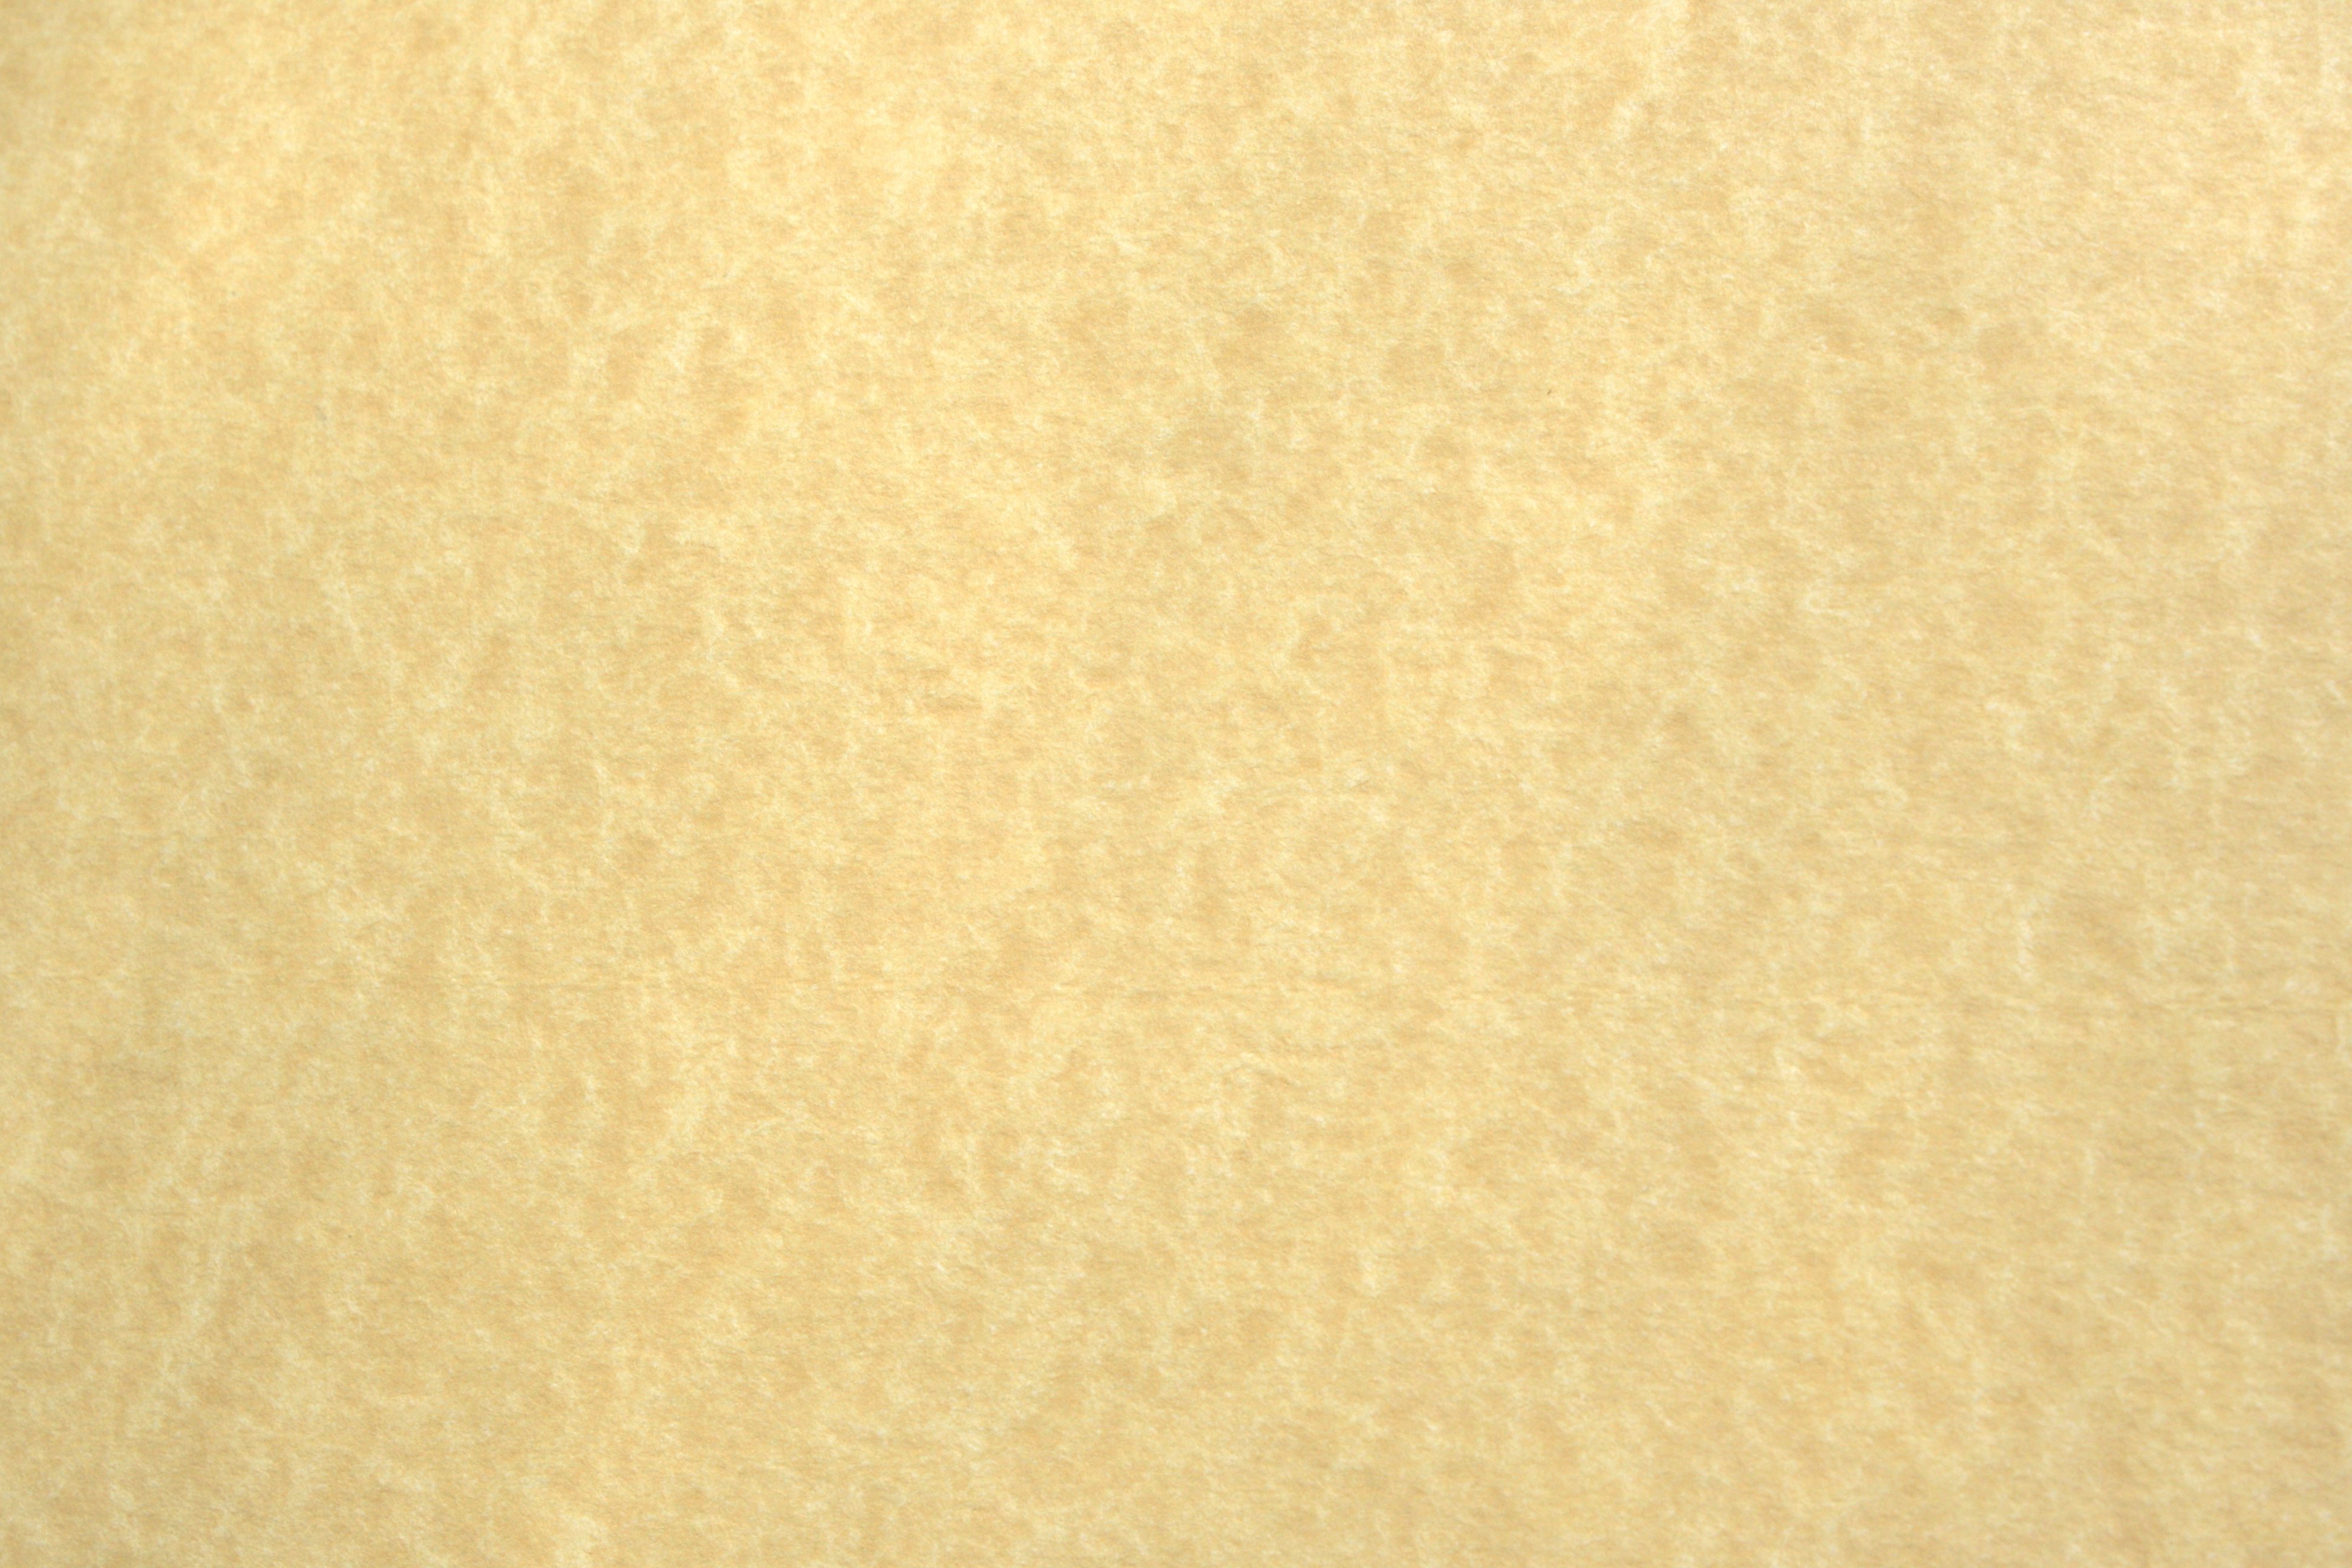 Light Colored Parchment Paper Texture   Free High Resolution Photo